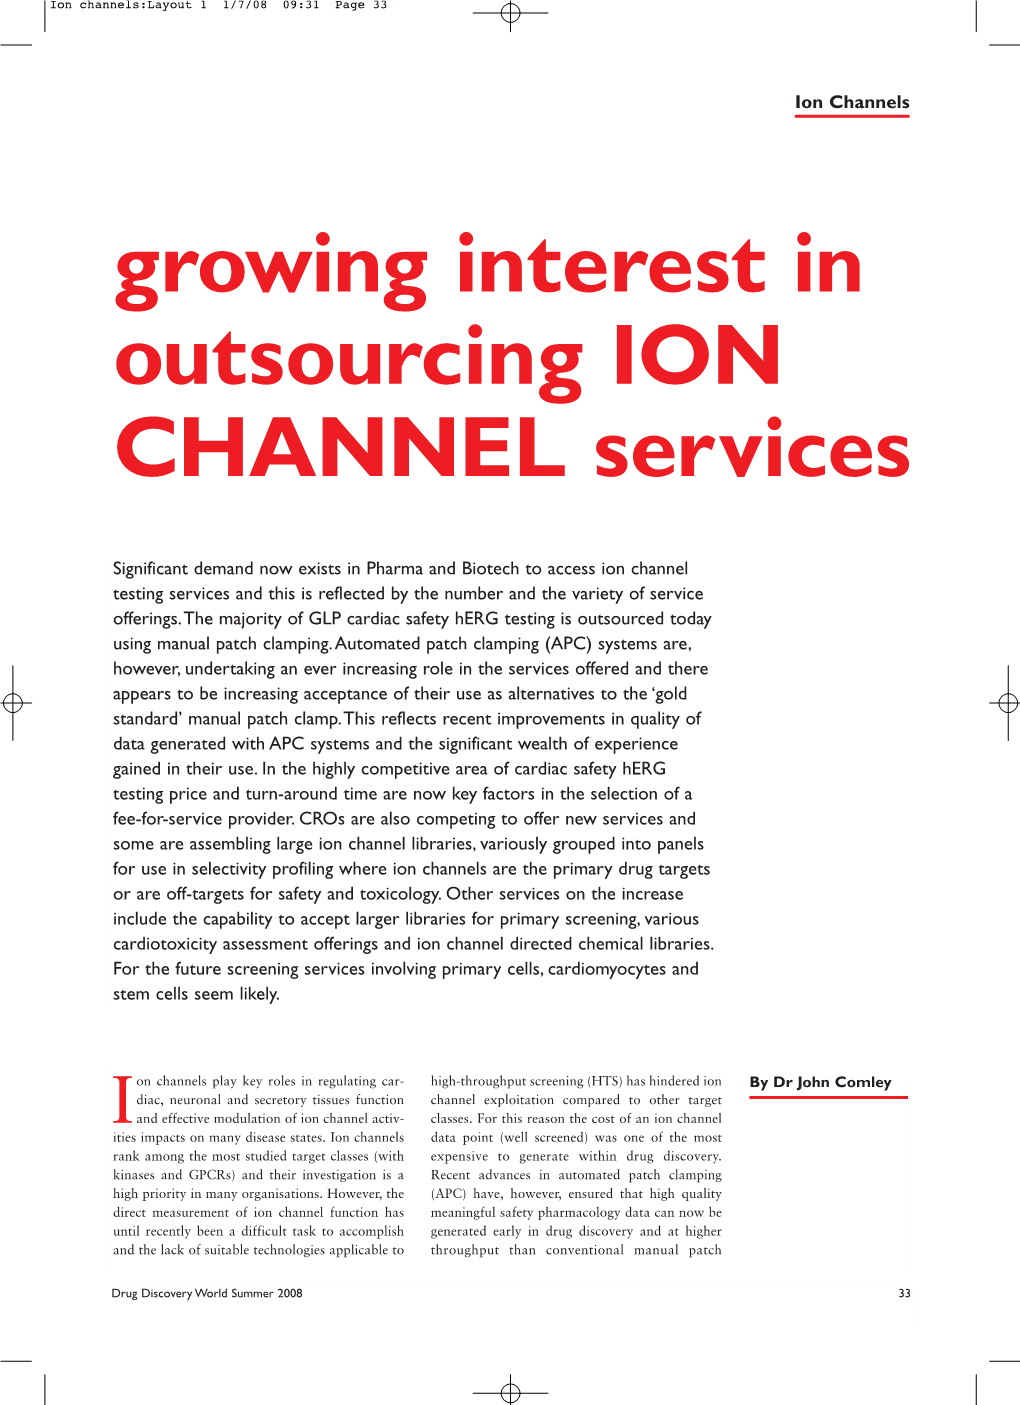 Growing Interest in Outsourcing ION CHANNEL Services